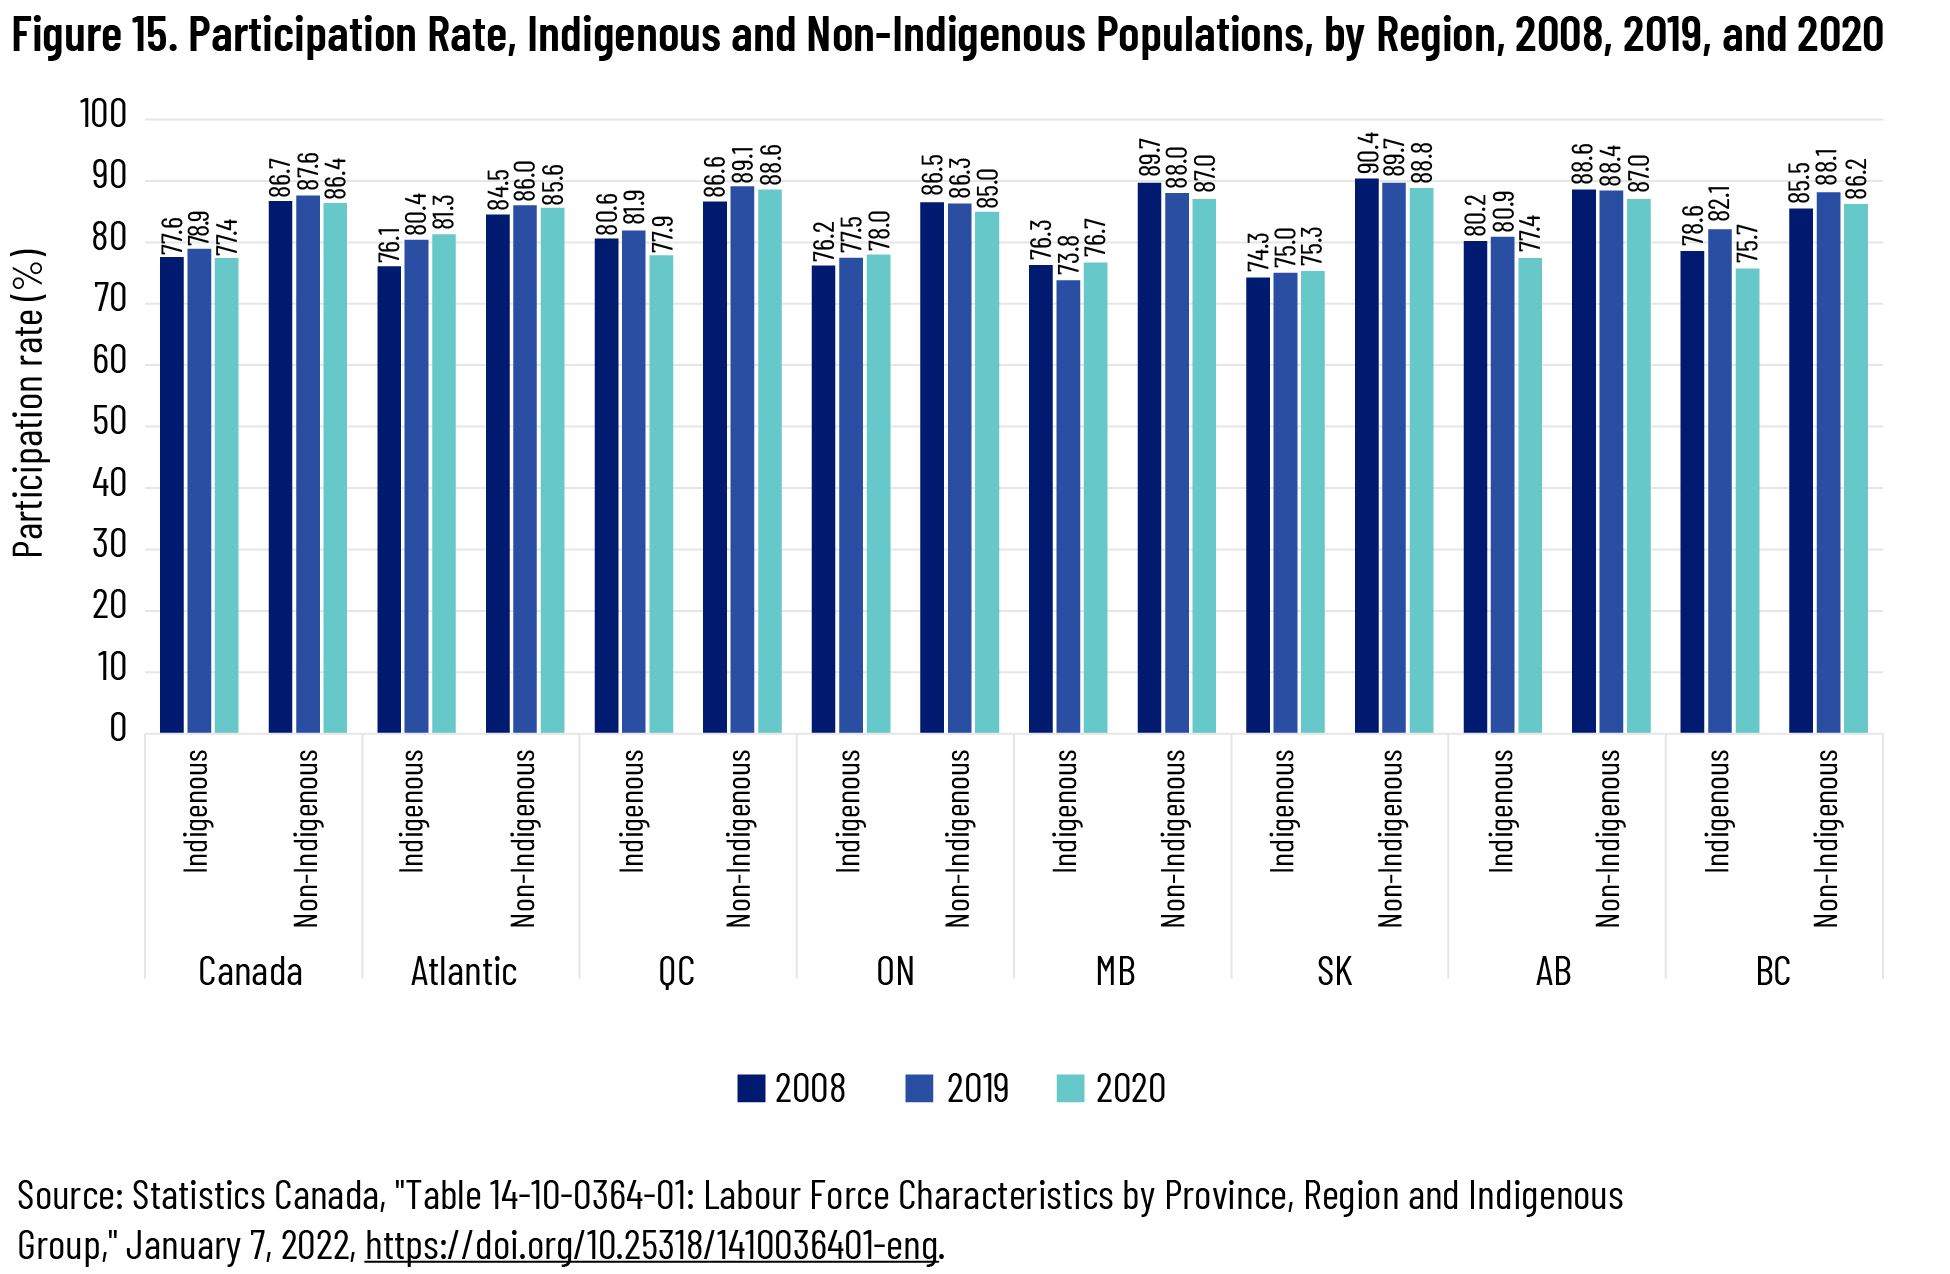 Figure 15. Participation Rate, Indigenous and Non-Indigenous Populations, by Region, 2008, 2019, and 2020